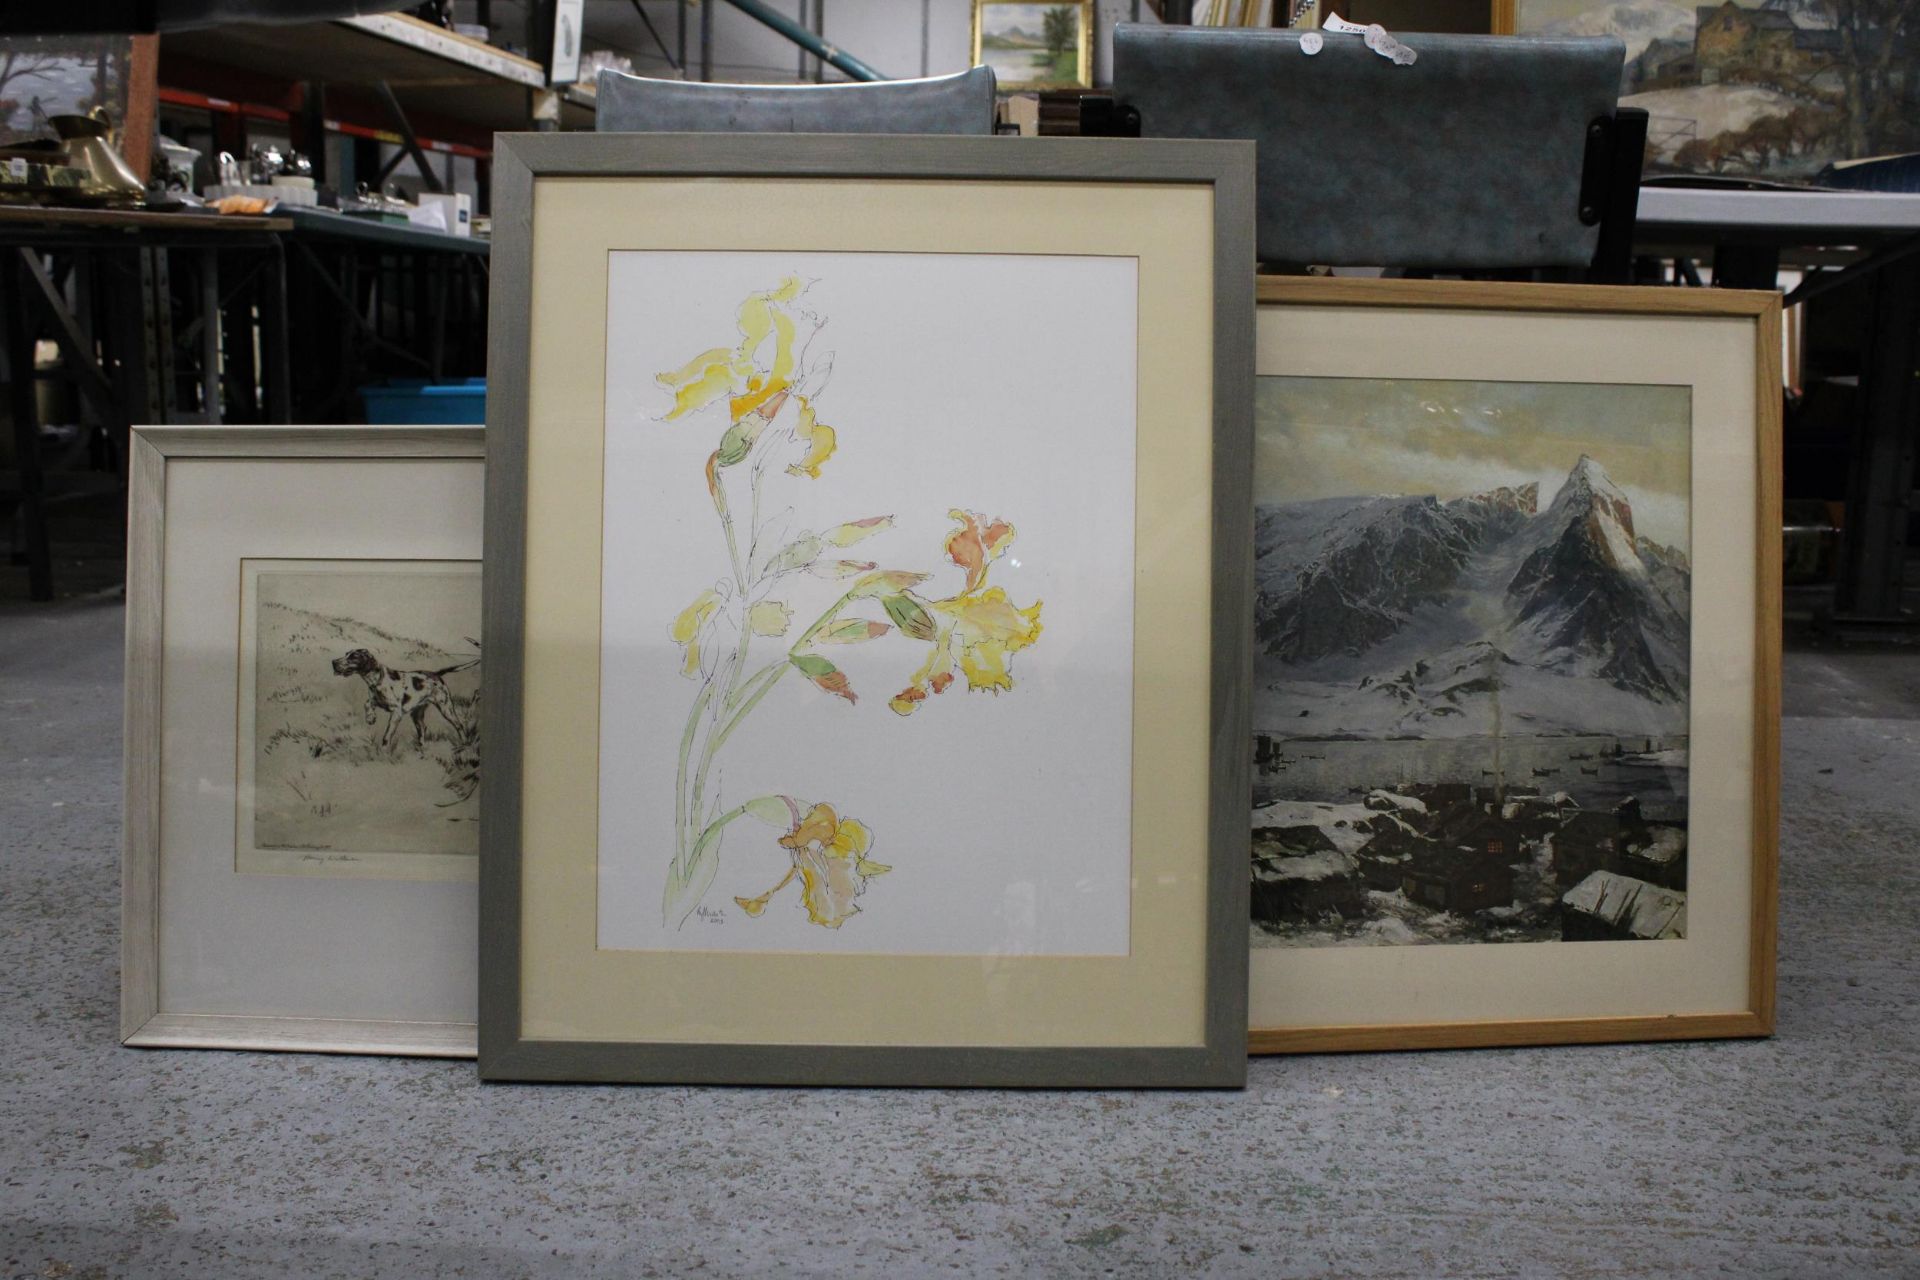 THREE FRAMED PRINTS, A MOUNTAIN SCENE, FLORAL AND HUNTING DOGS